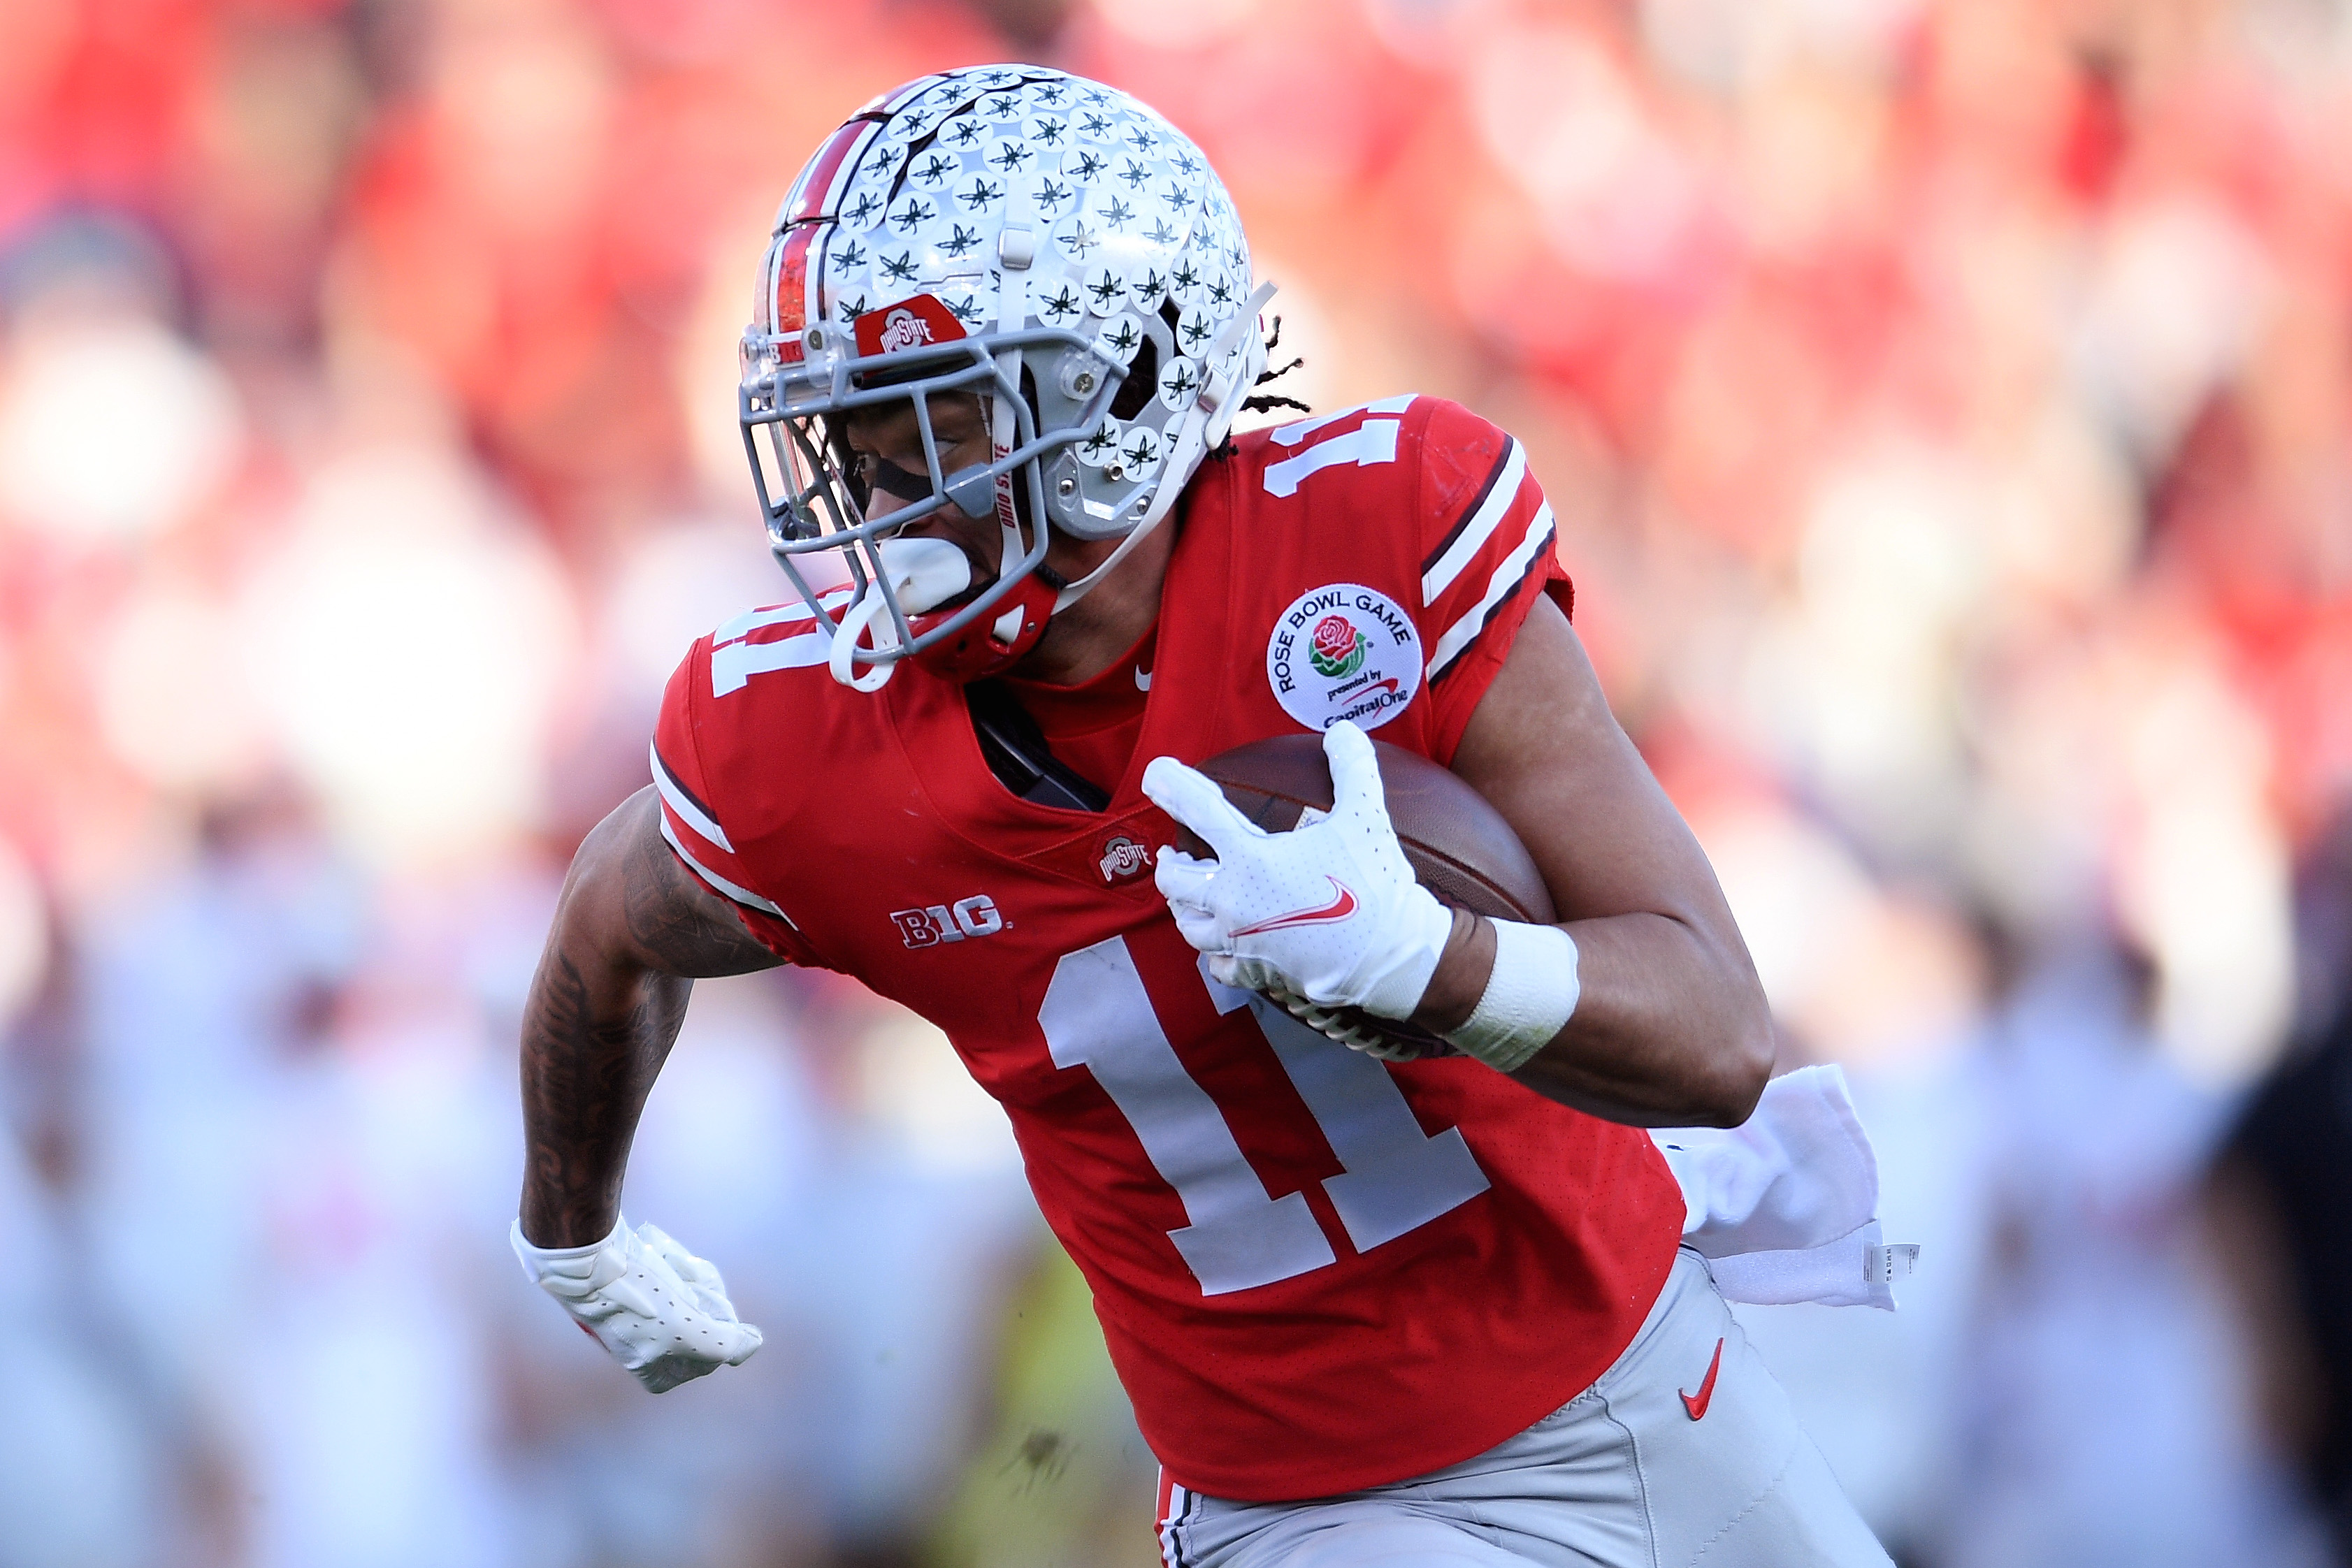 Ohio State Buckeyes wide receiver Jaxon Smith-Njigba runs in the second quarter against the Utah Utes during the 2022 Rose Bowl college football game at the Rose Bowl.&nbsp;